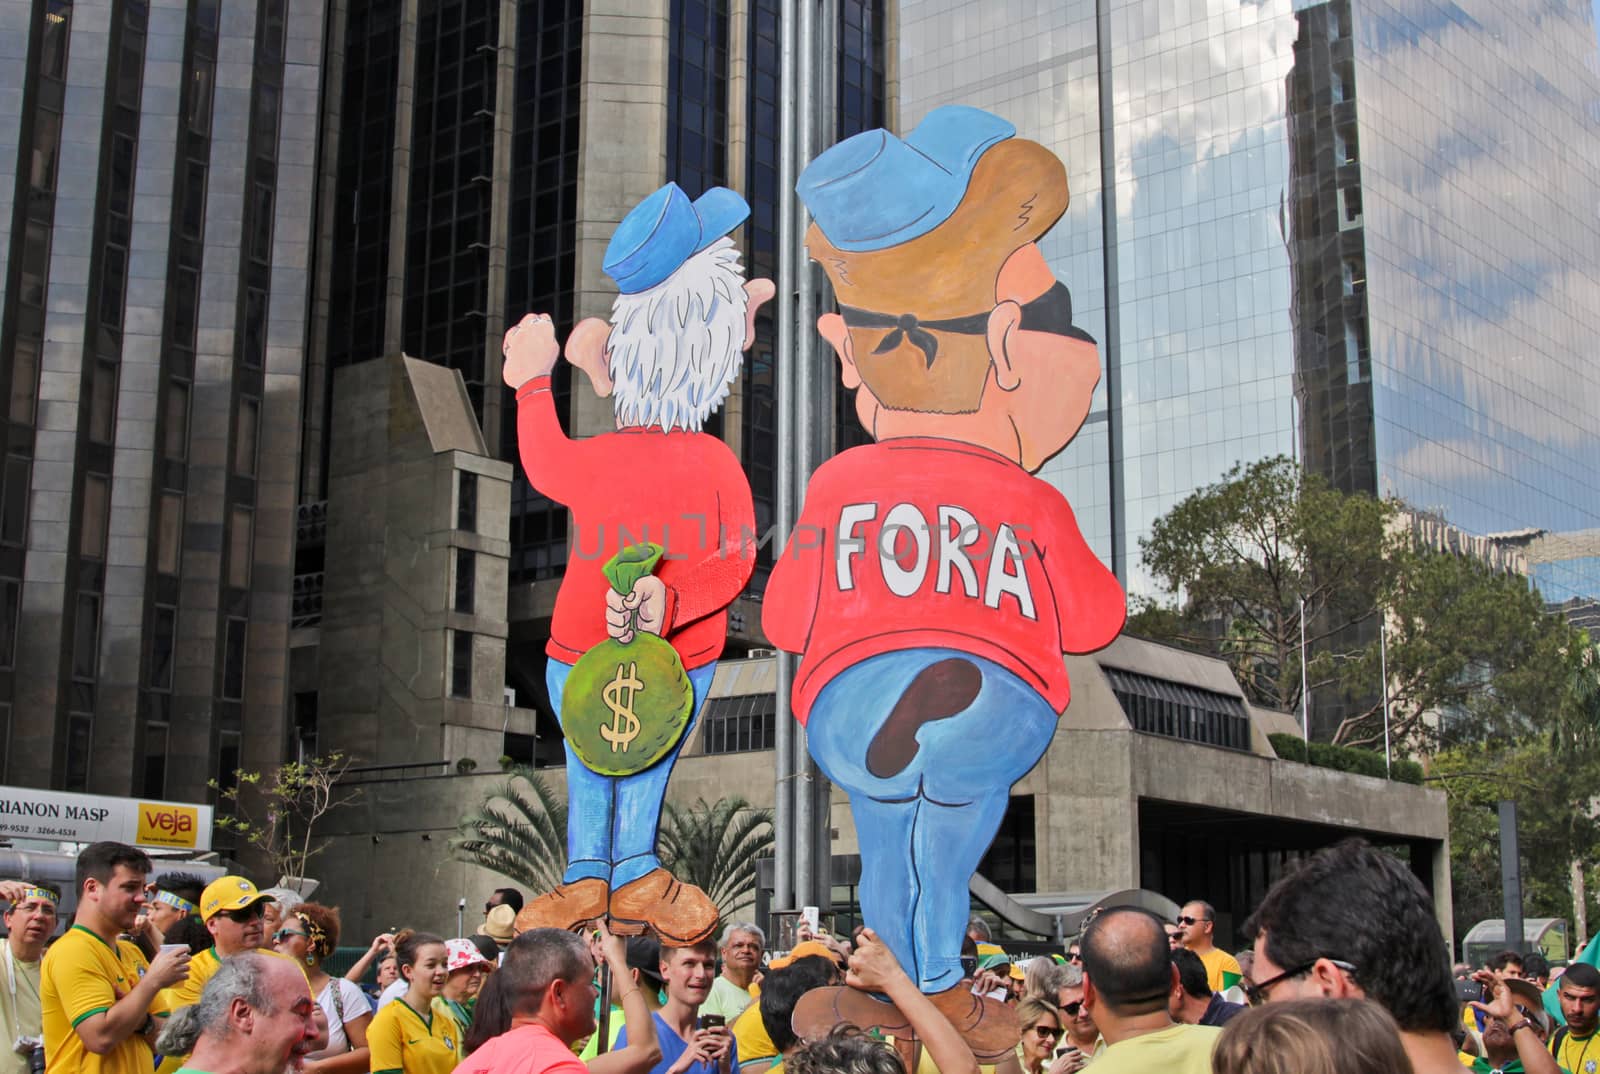 SAO PAULO, BRAZIL August 16 2015: An unidentified group of people with flags and yellow and green clothes in the protest against federal government corruption in Sao Paulo Brazil.